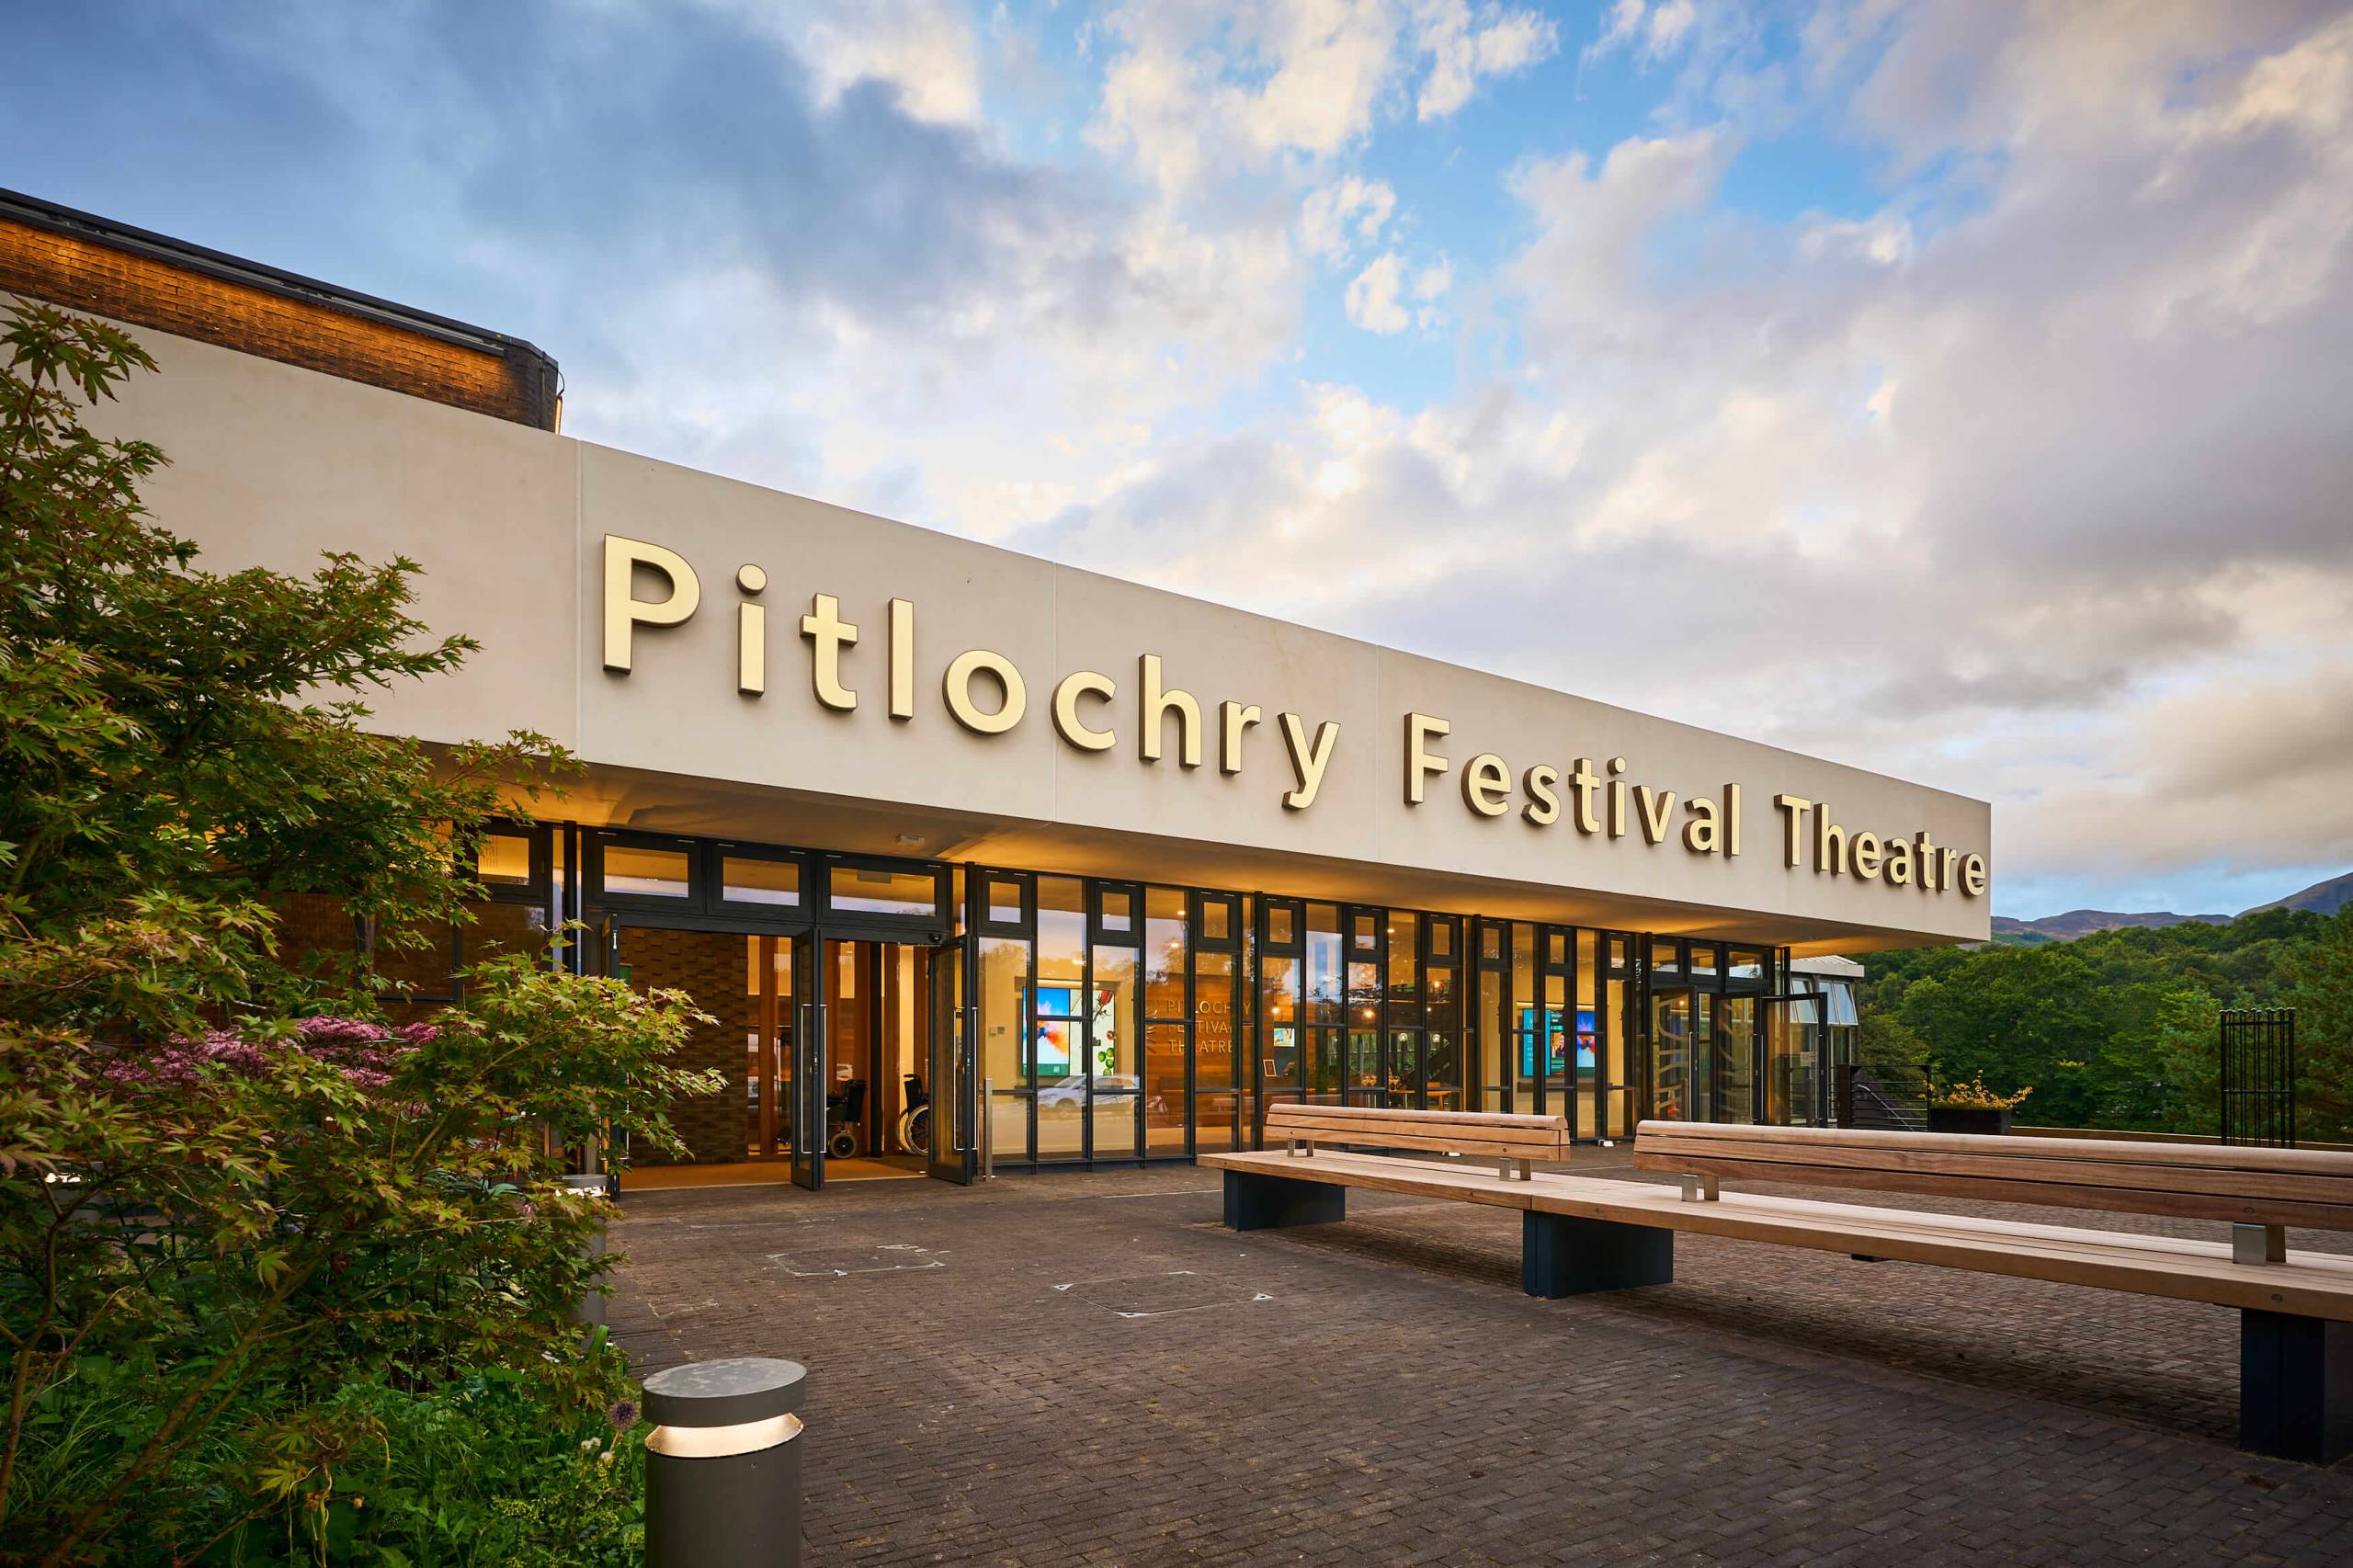 The entrance to Pitlochry Festival Theatre.